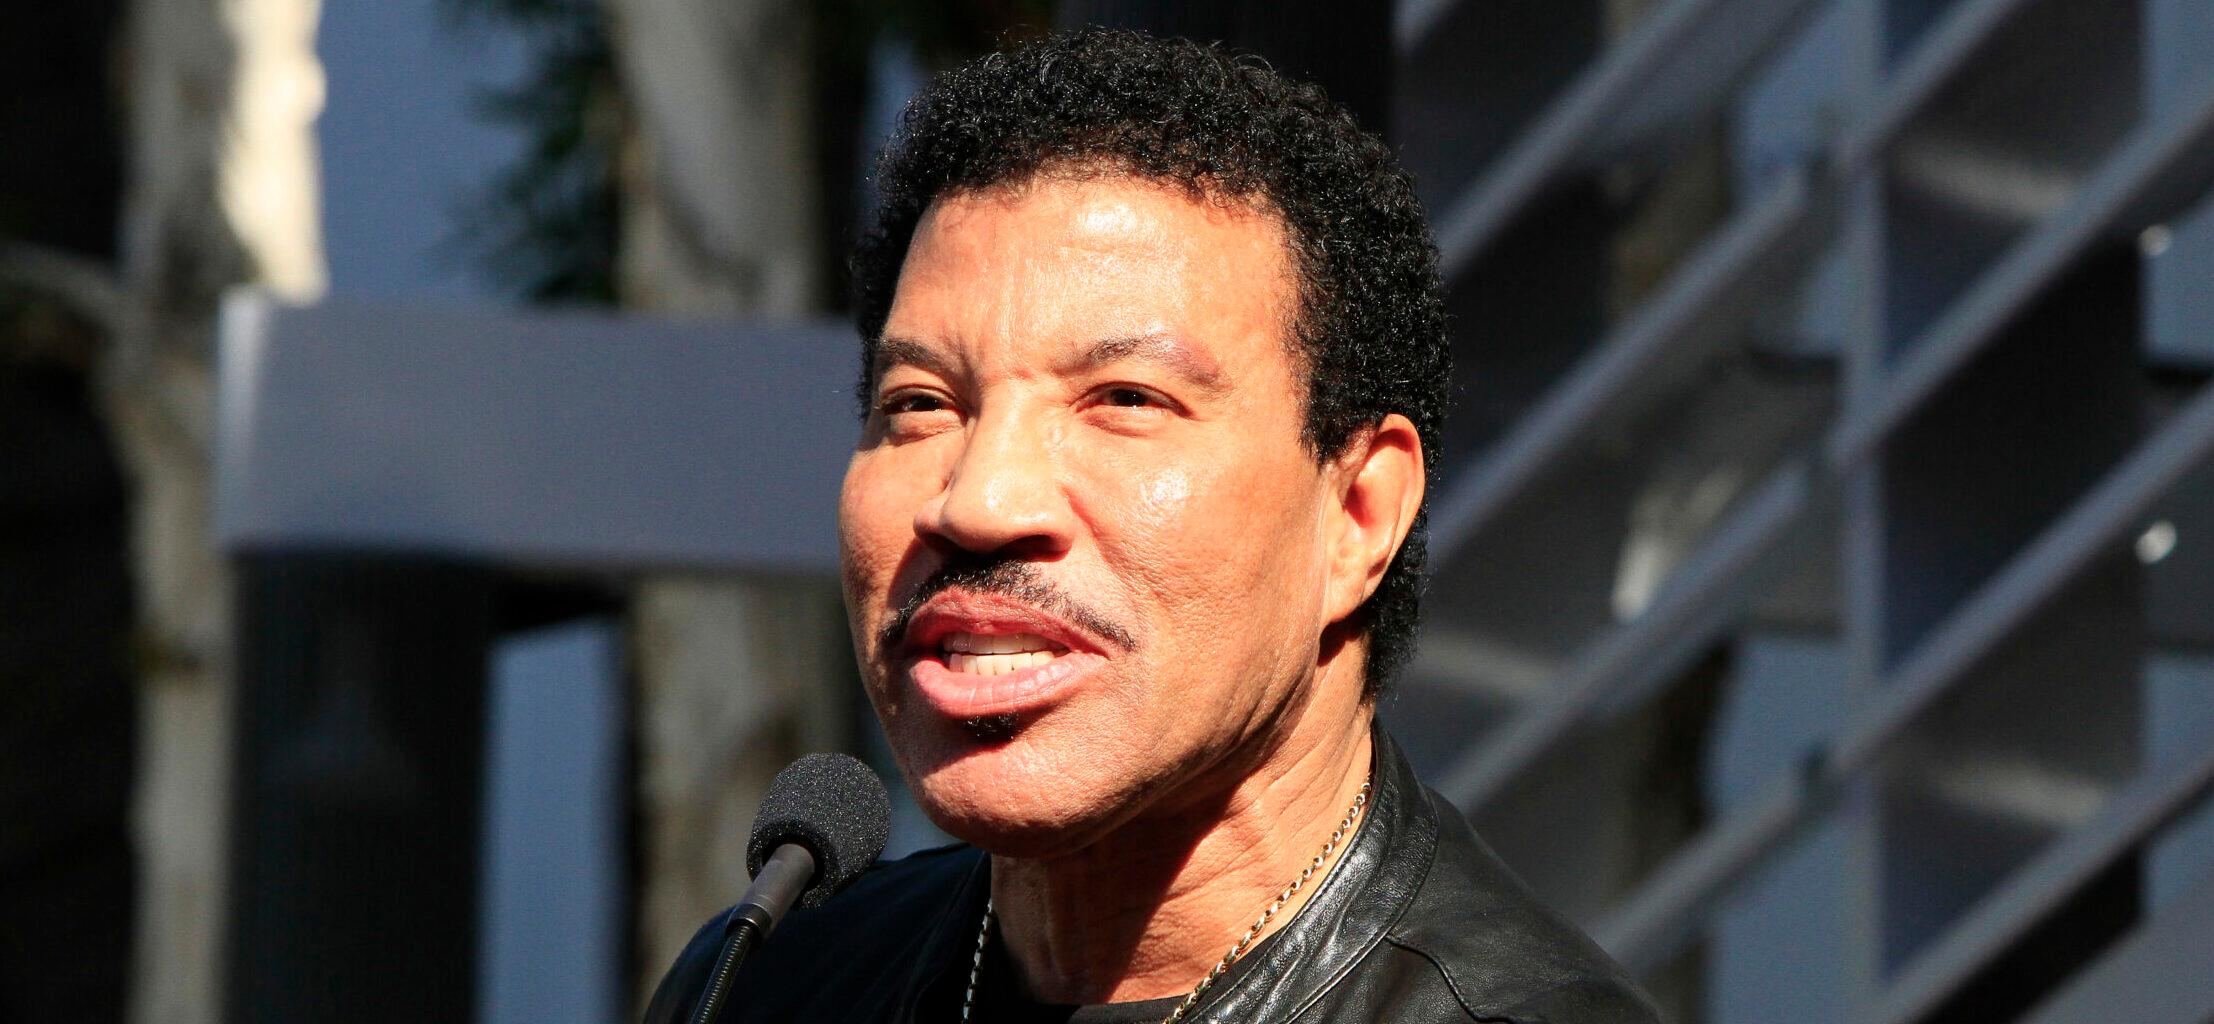 Lionel Richie Reflects On Fatherhood: ‘My Kids Turned Me Into My Parents’